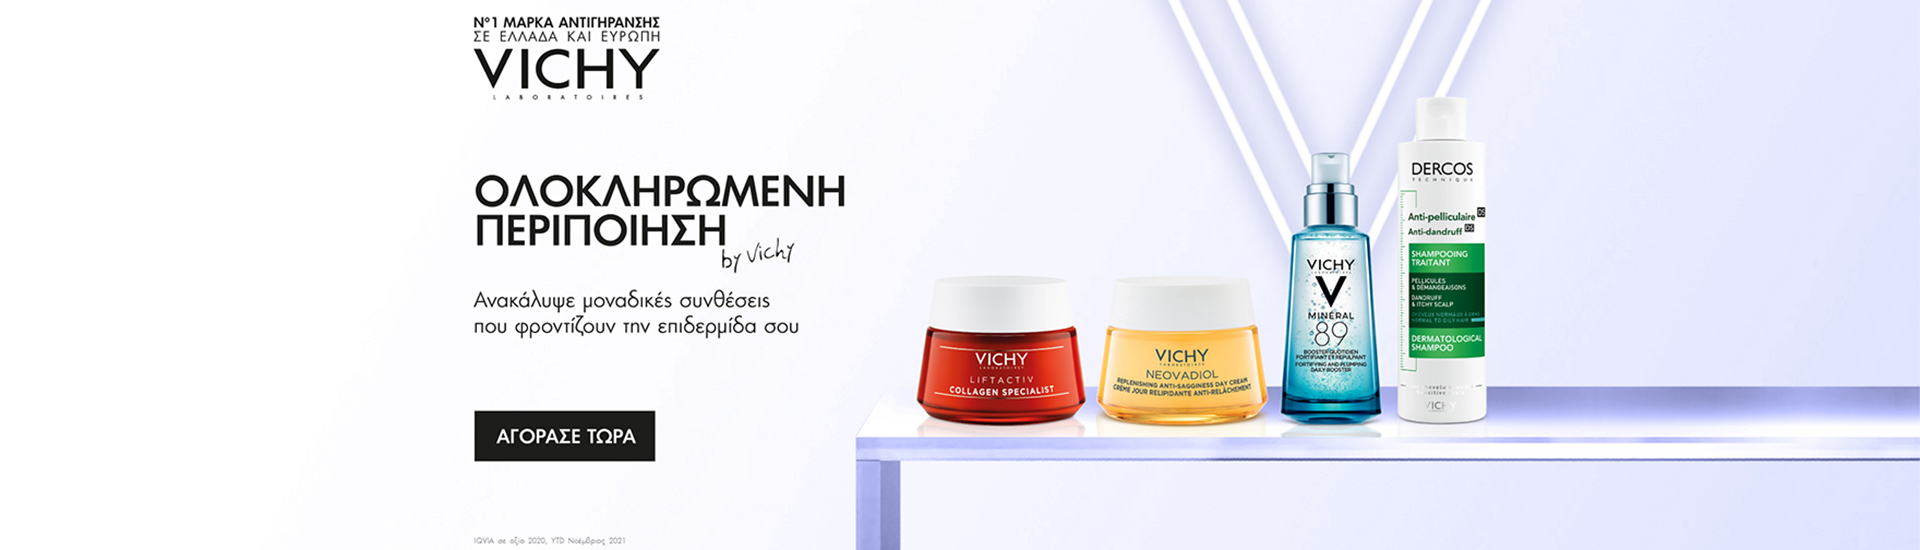 vichy all prods